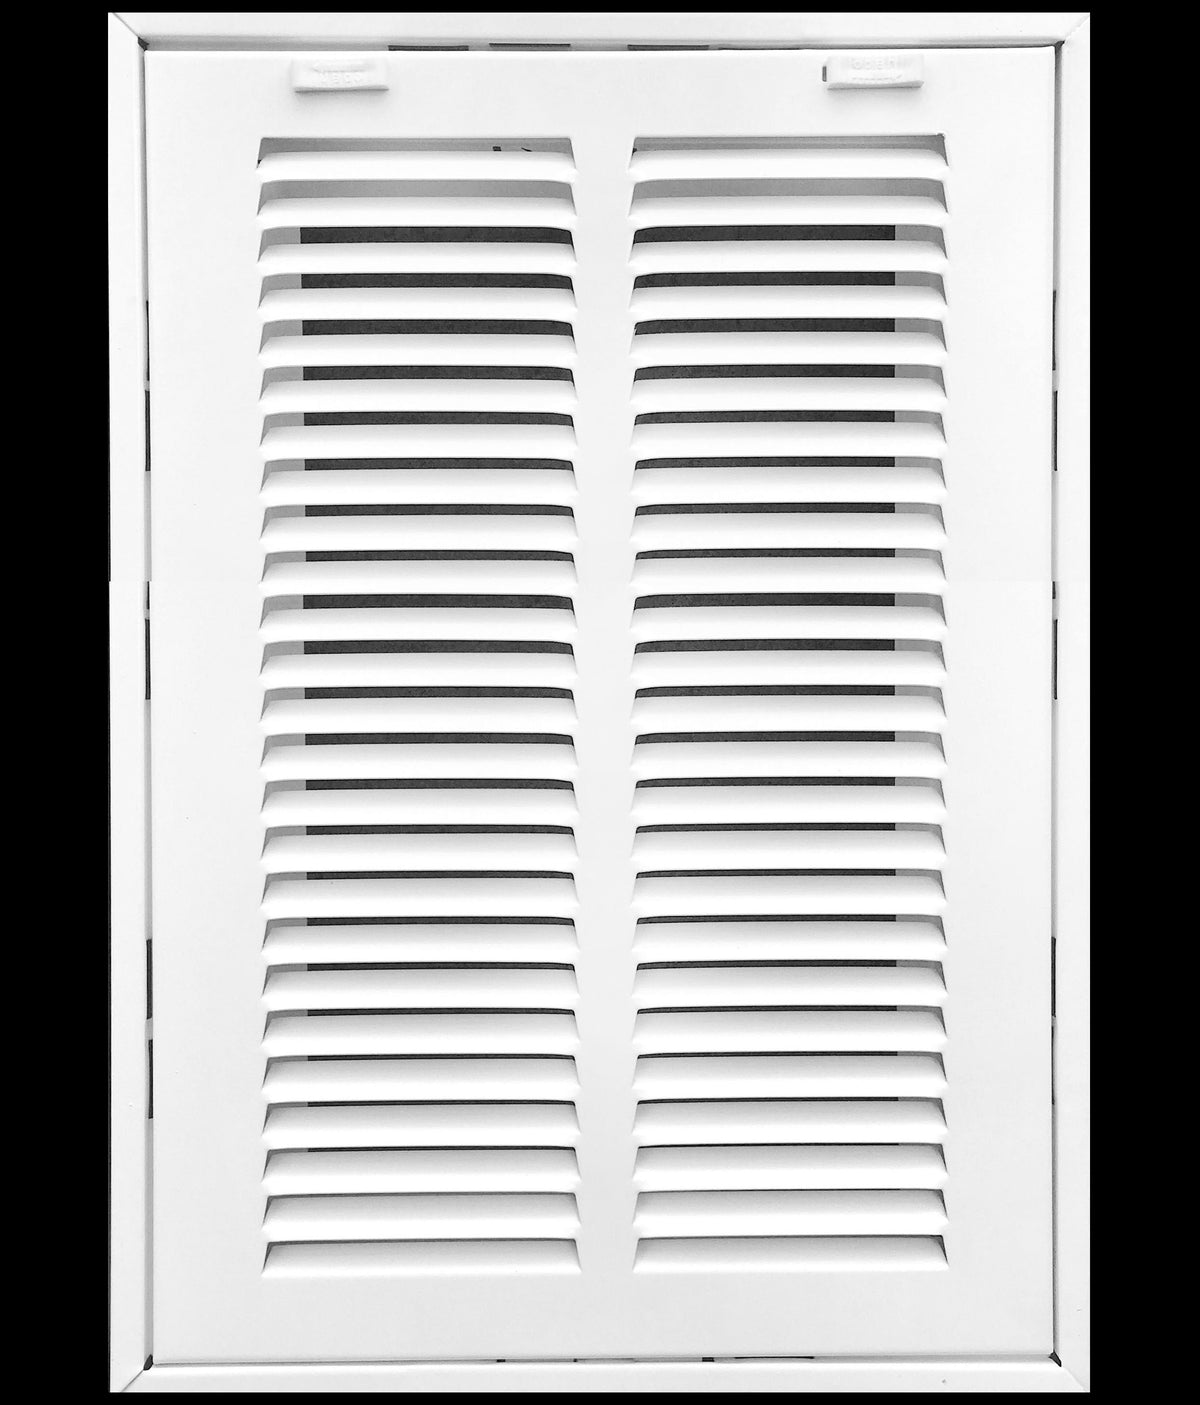 8&quot; X 16&quot; Steel Return Air Filter Grille for 1&quot; Filter - Removable Frame - [Outer Dimensions: 10 5/8&quot; X 18 5/8&quot;]